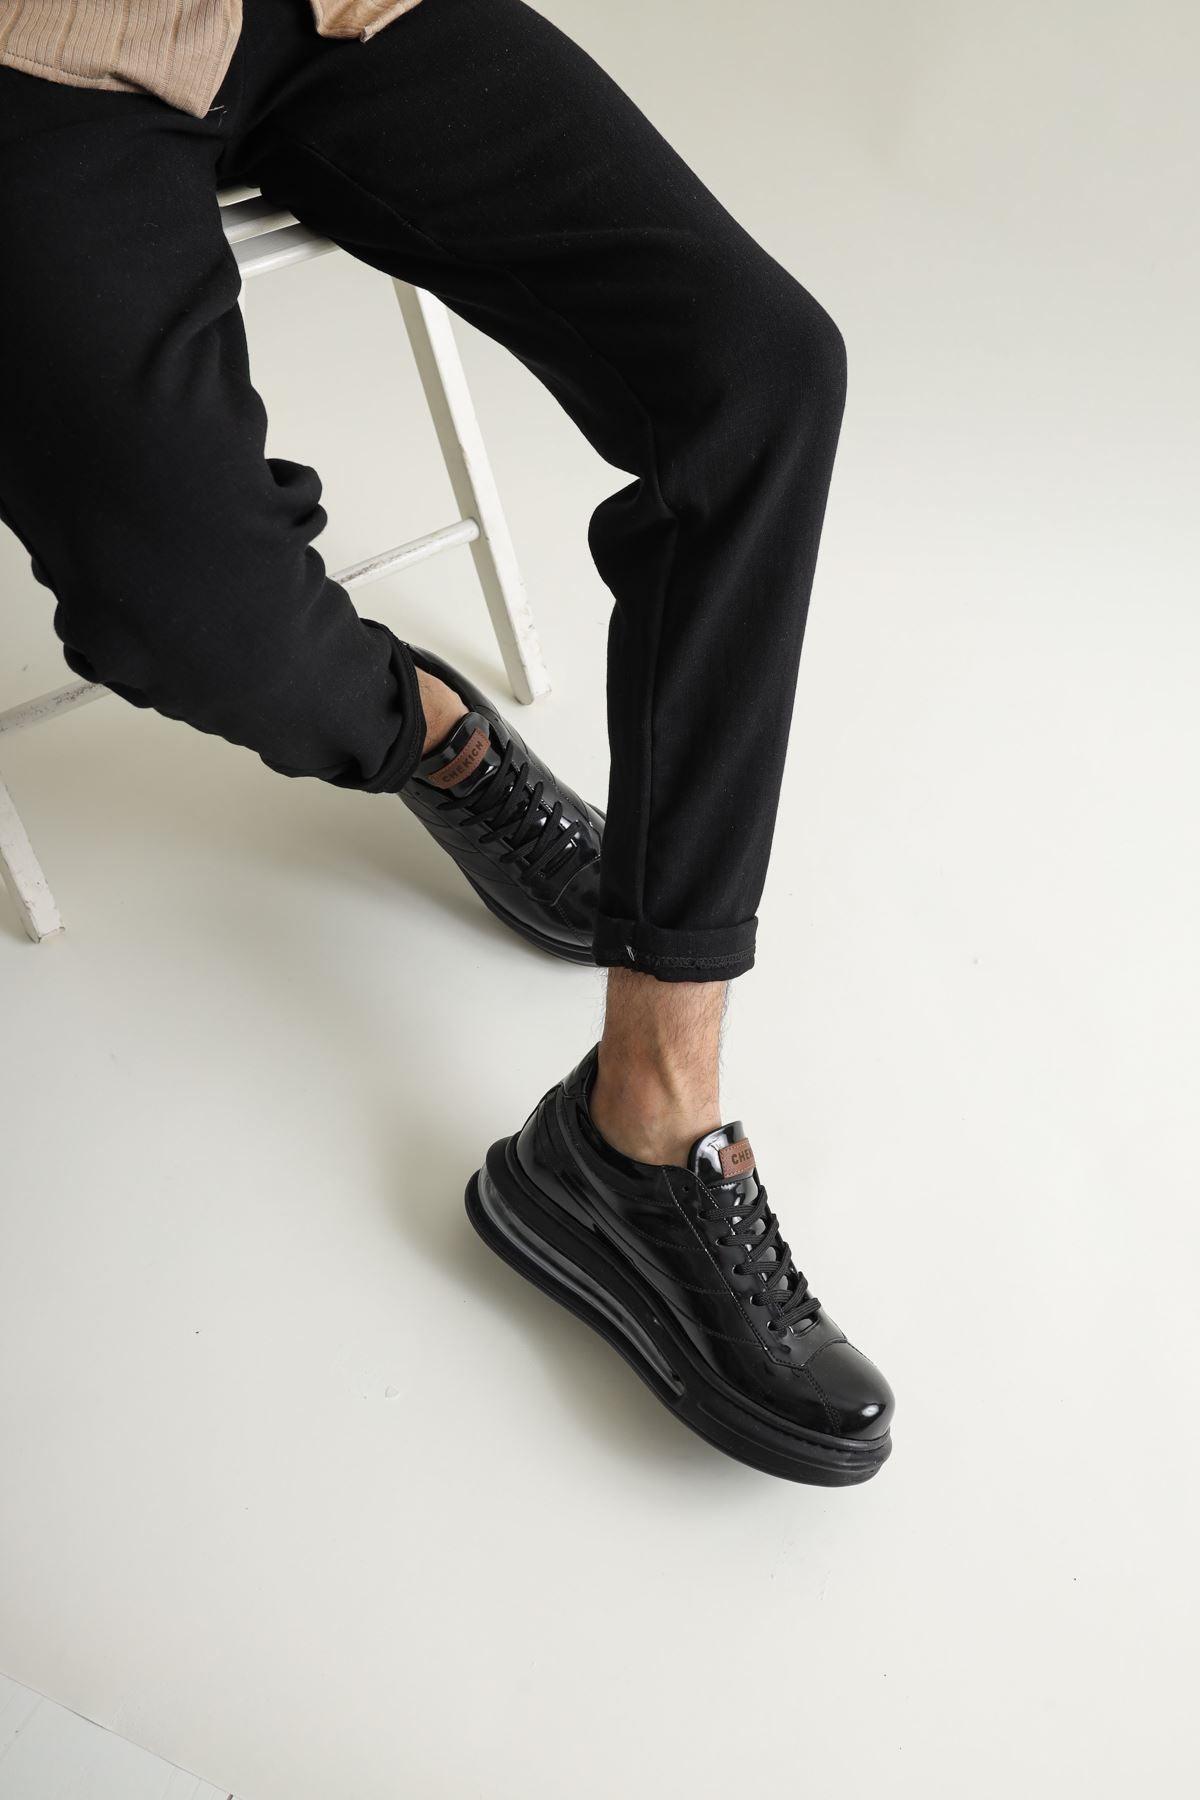 CH171 Patent Leather ST Men's Sneaker Shoes - STREET MODE ™